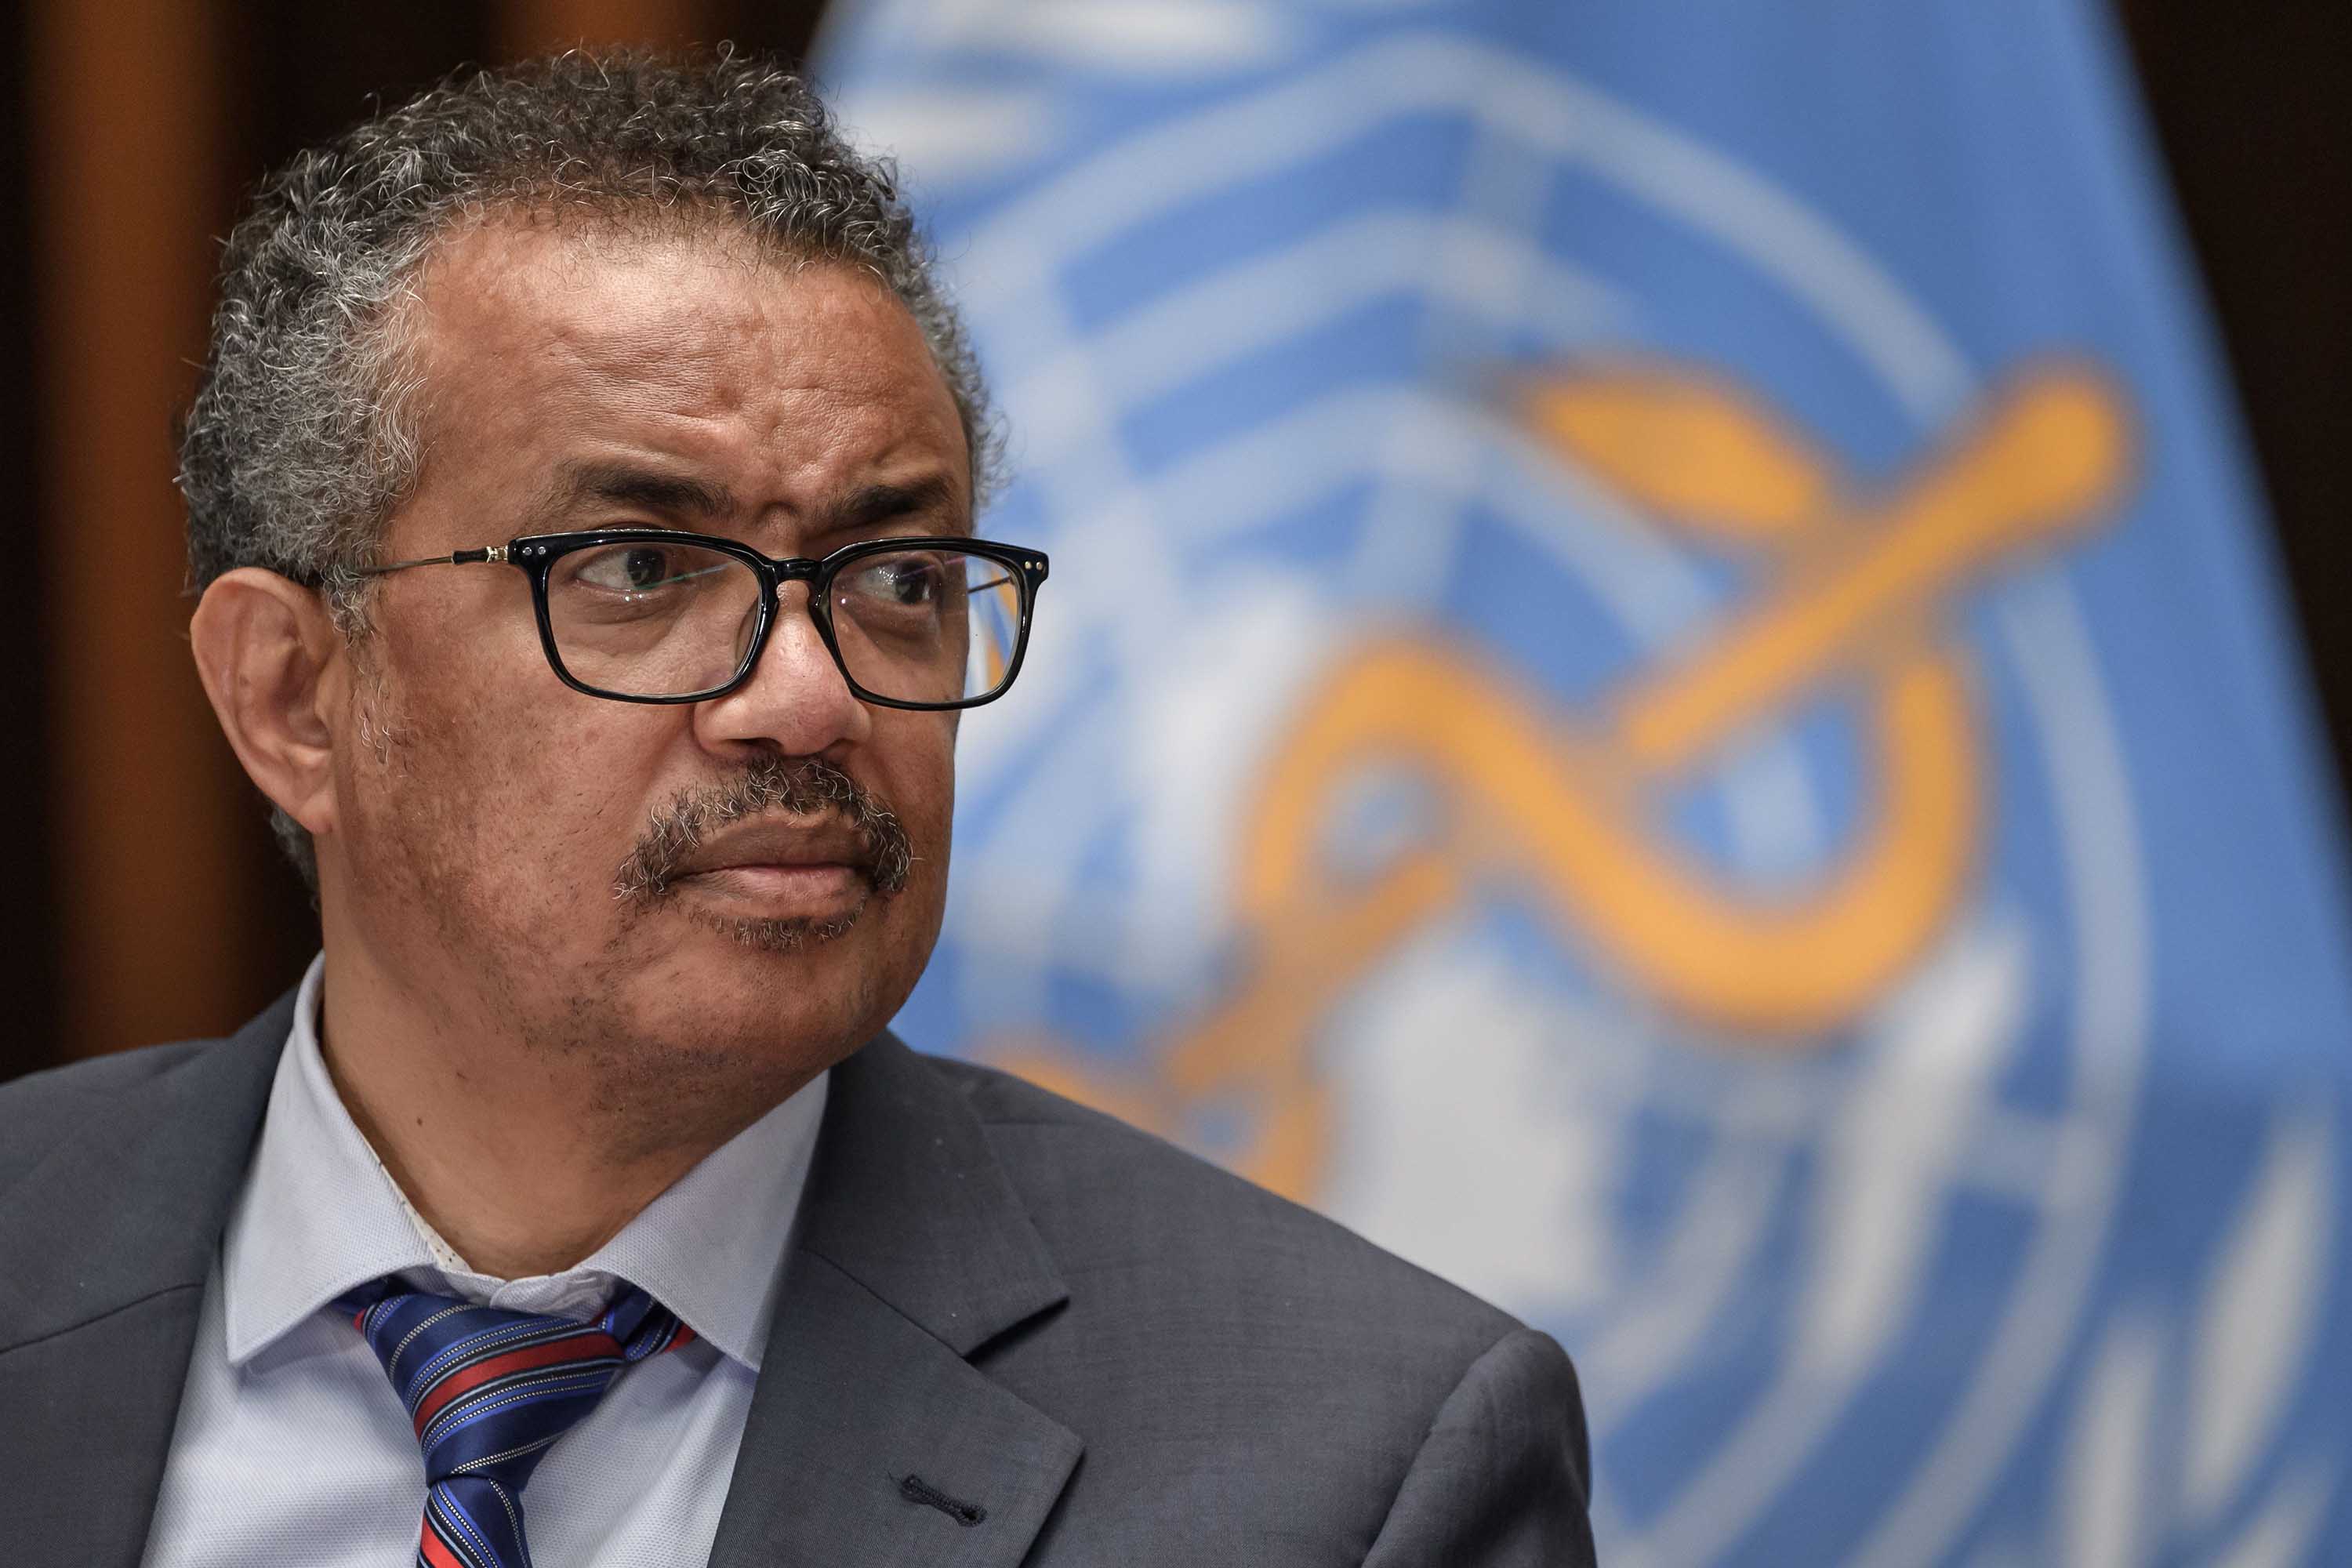 World Health Organization (WHO) Director-General Tedros Adhanom Ghebreyesus is pictured at a press conference at the WHO headquarters in Geneva, Switzerland, in July 2020. 